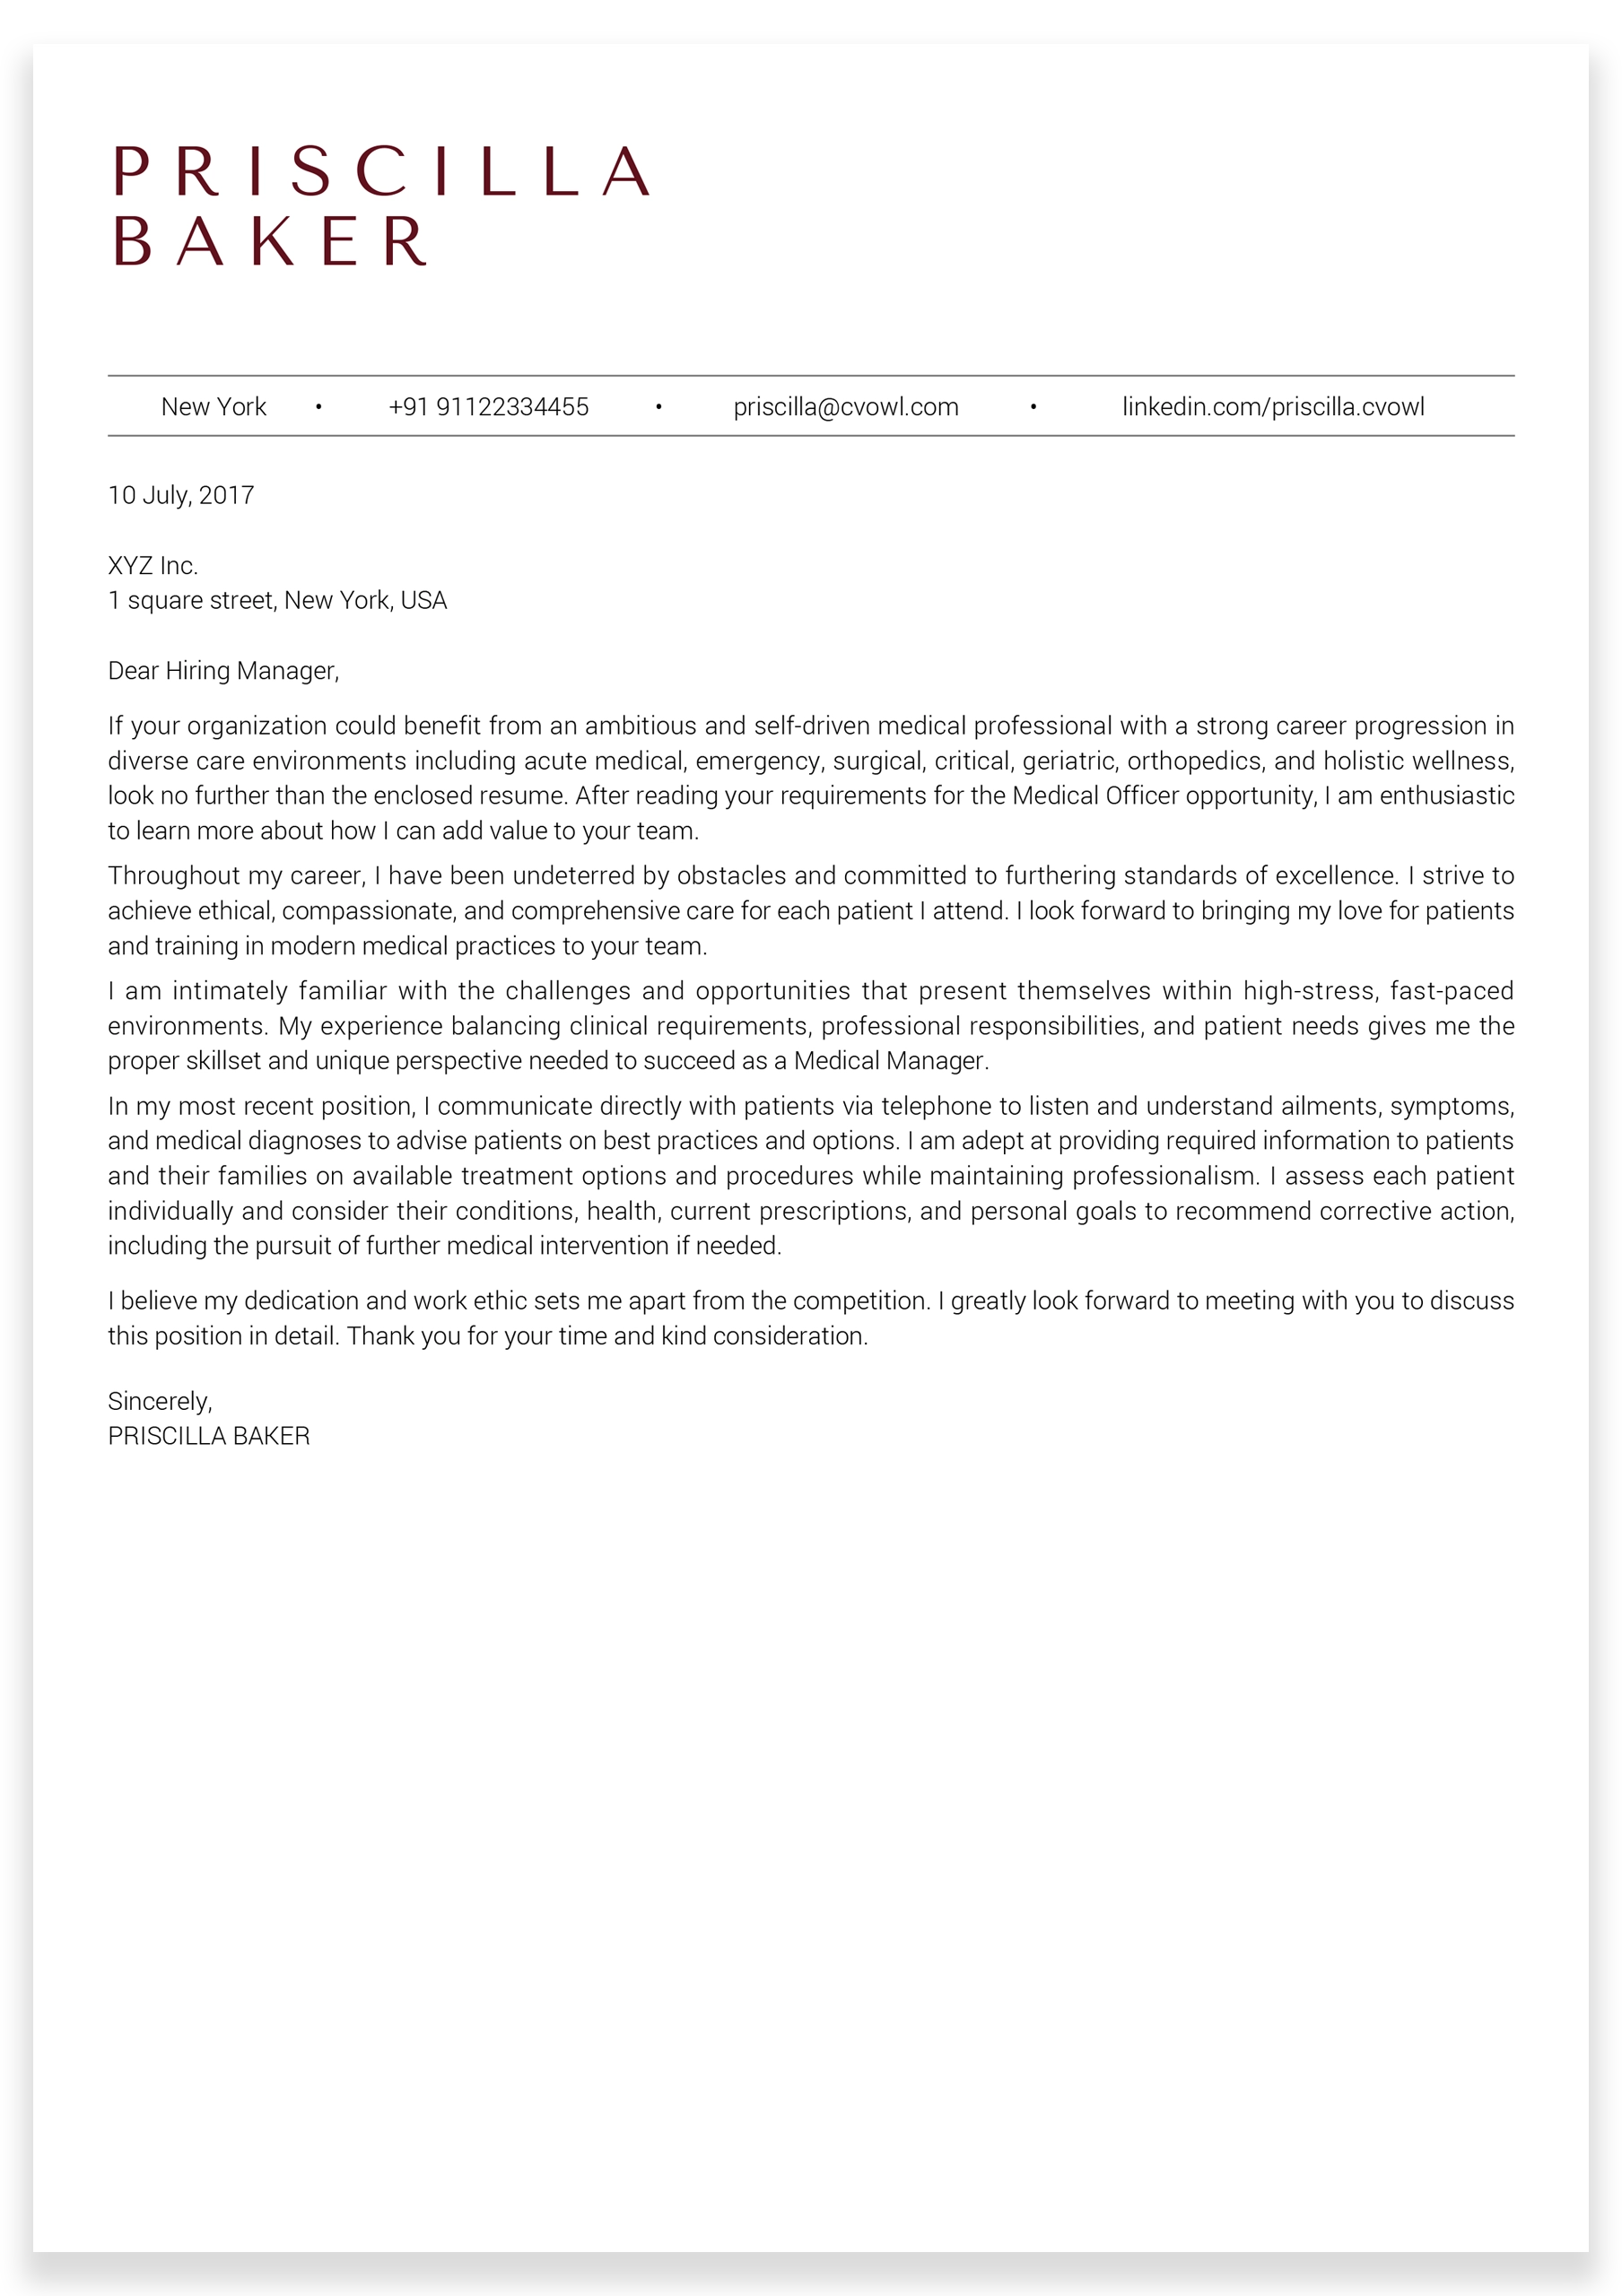 Clinical-Researcher-Cover-Letter-sample10